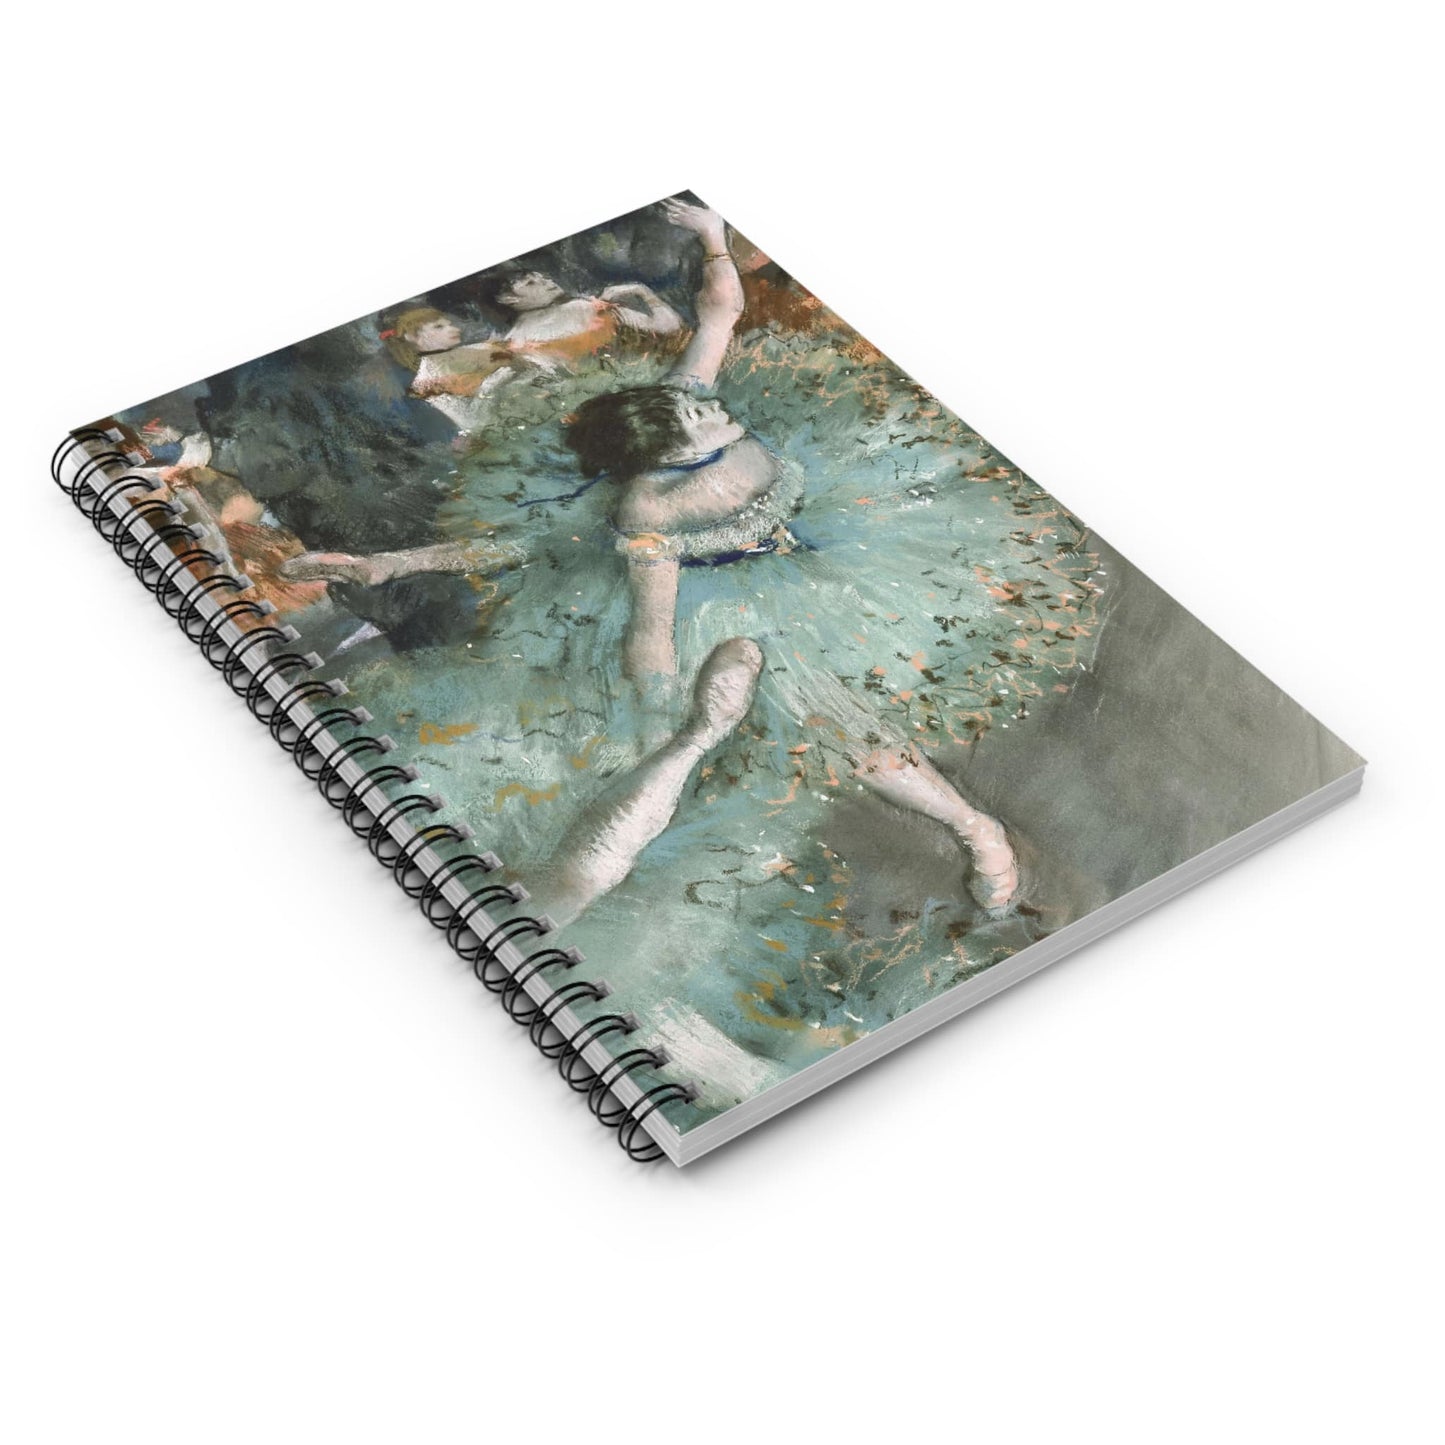 Ballet Painting Spiral Notebook Laying Flat on White Surface